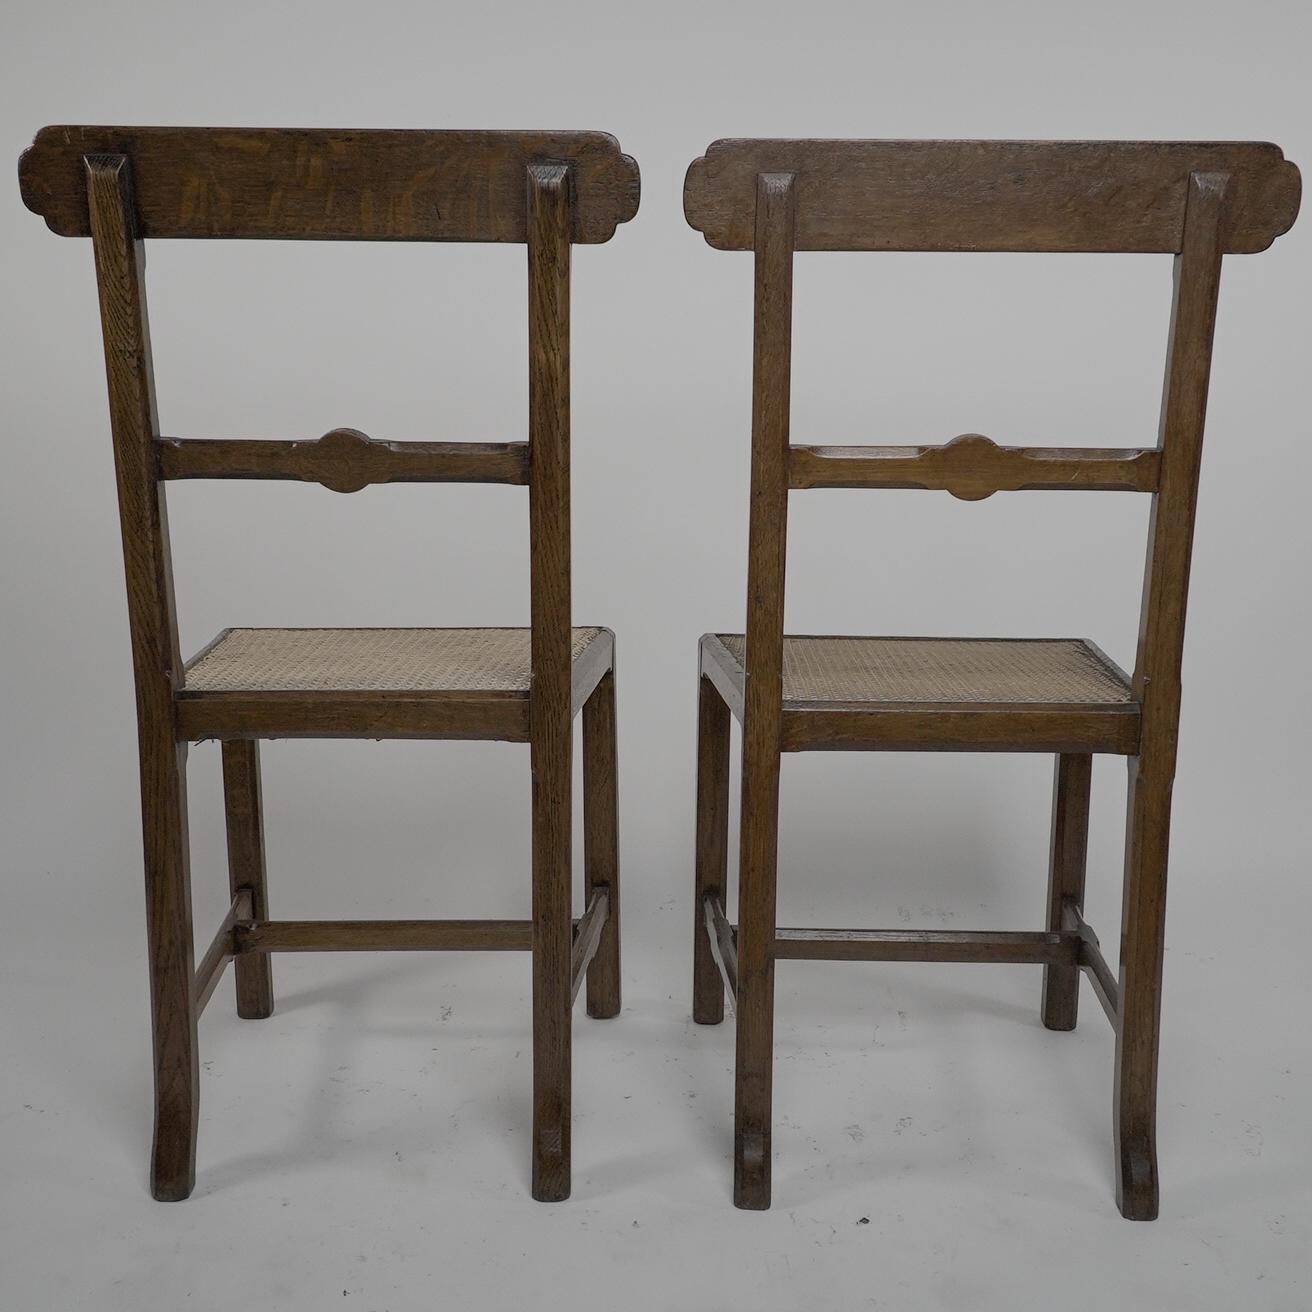 J.G.Crace attributed. In the style of AWN Pugin. A pair of Gothic Revival chairs For Sale 6